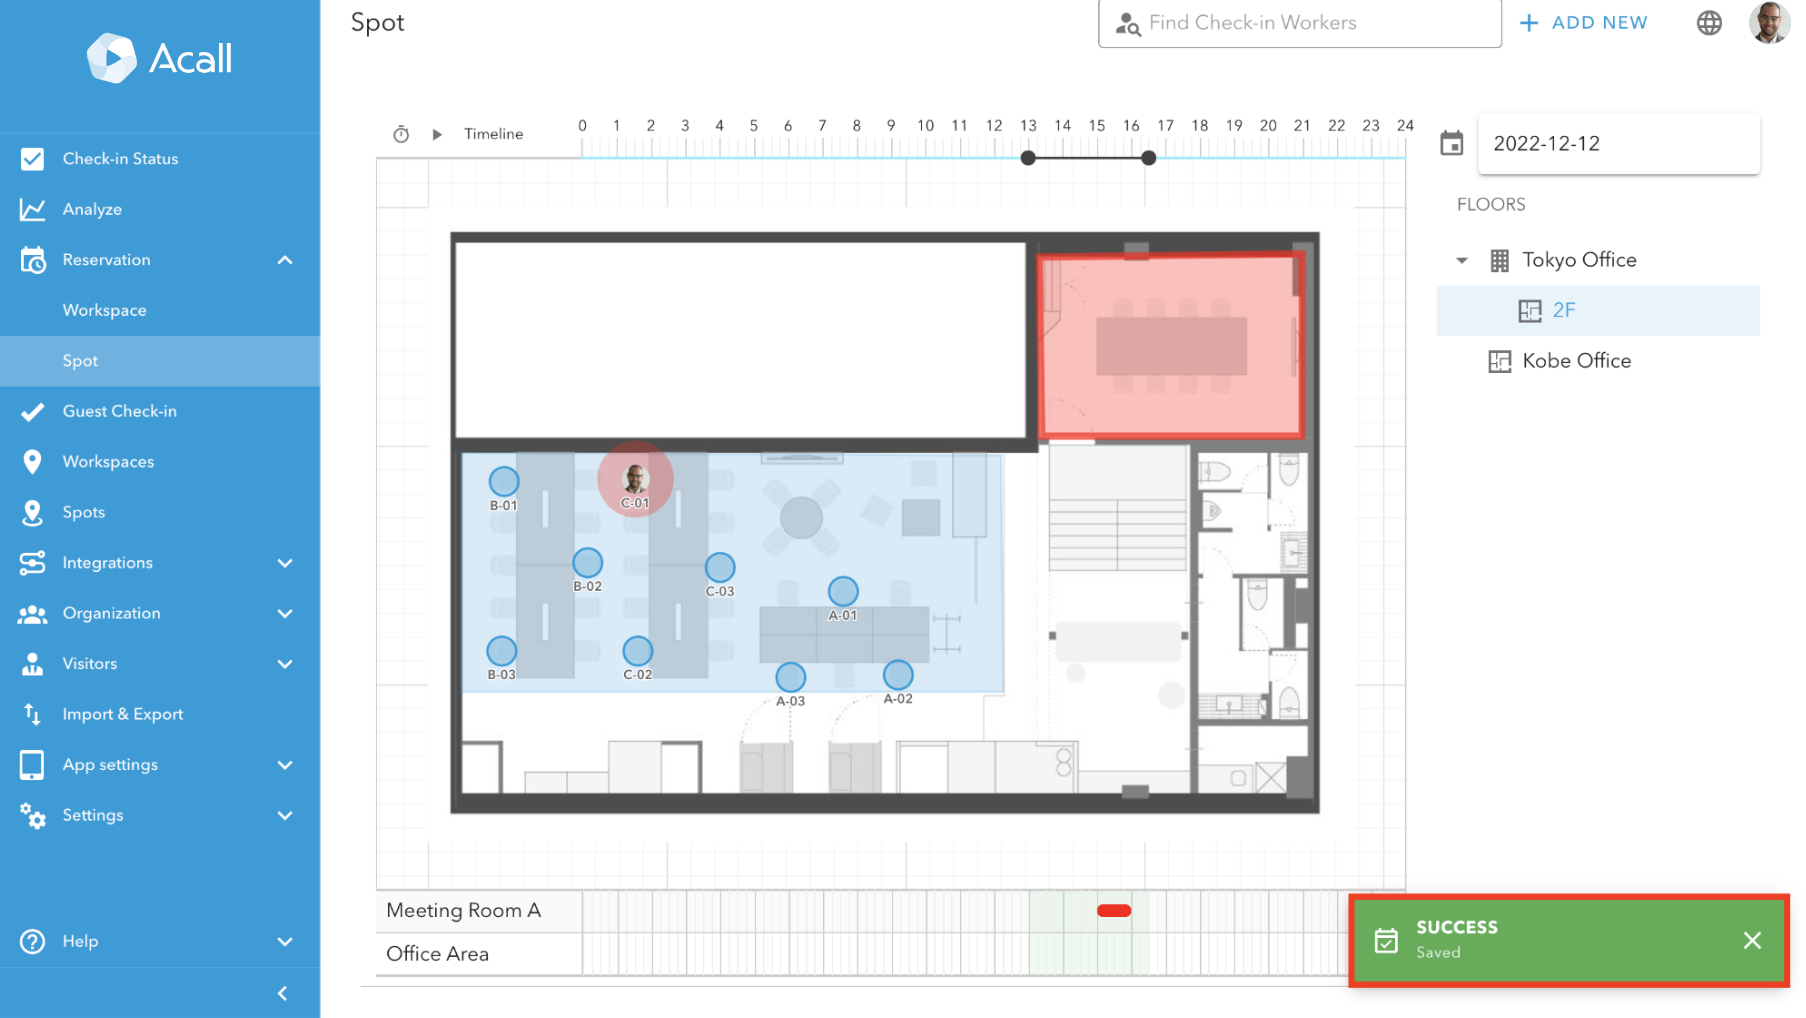 Reserve Your Spot on Floor Map on Acall Portal10.png